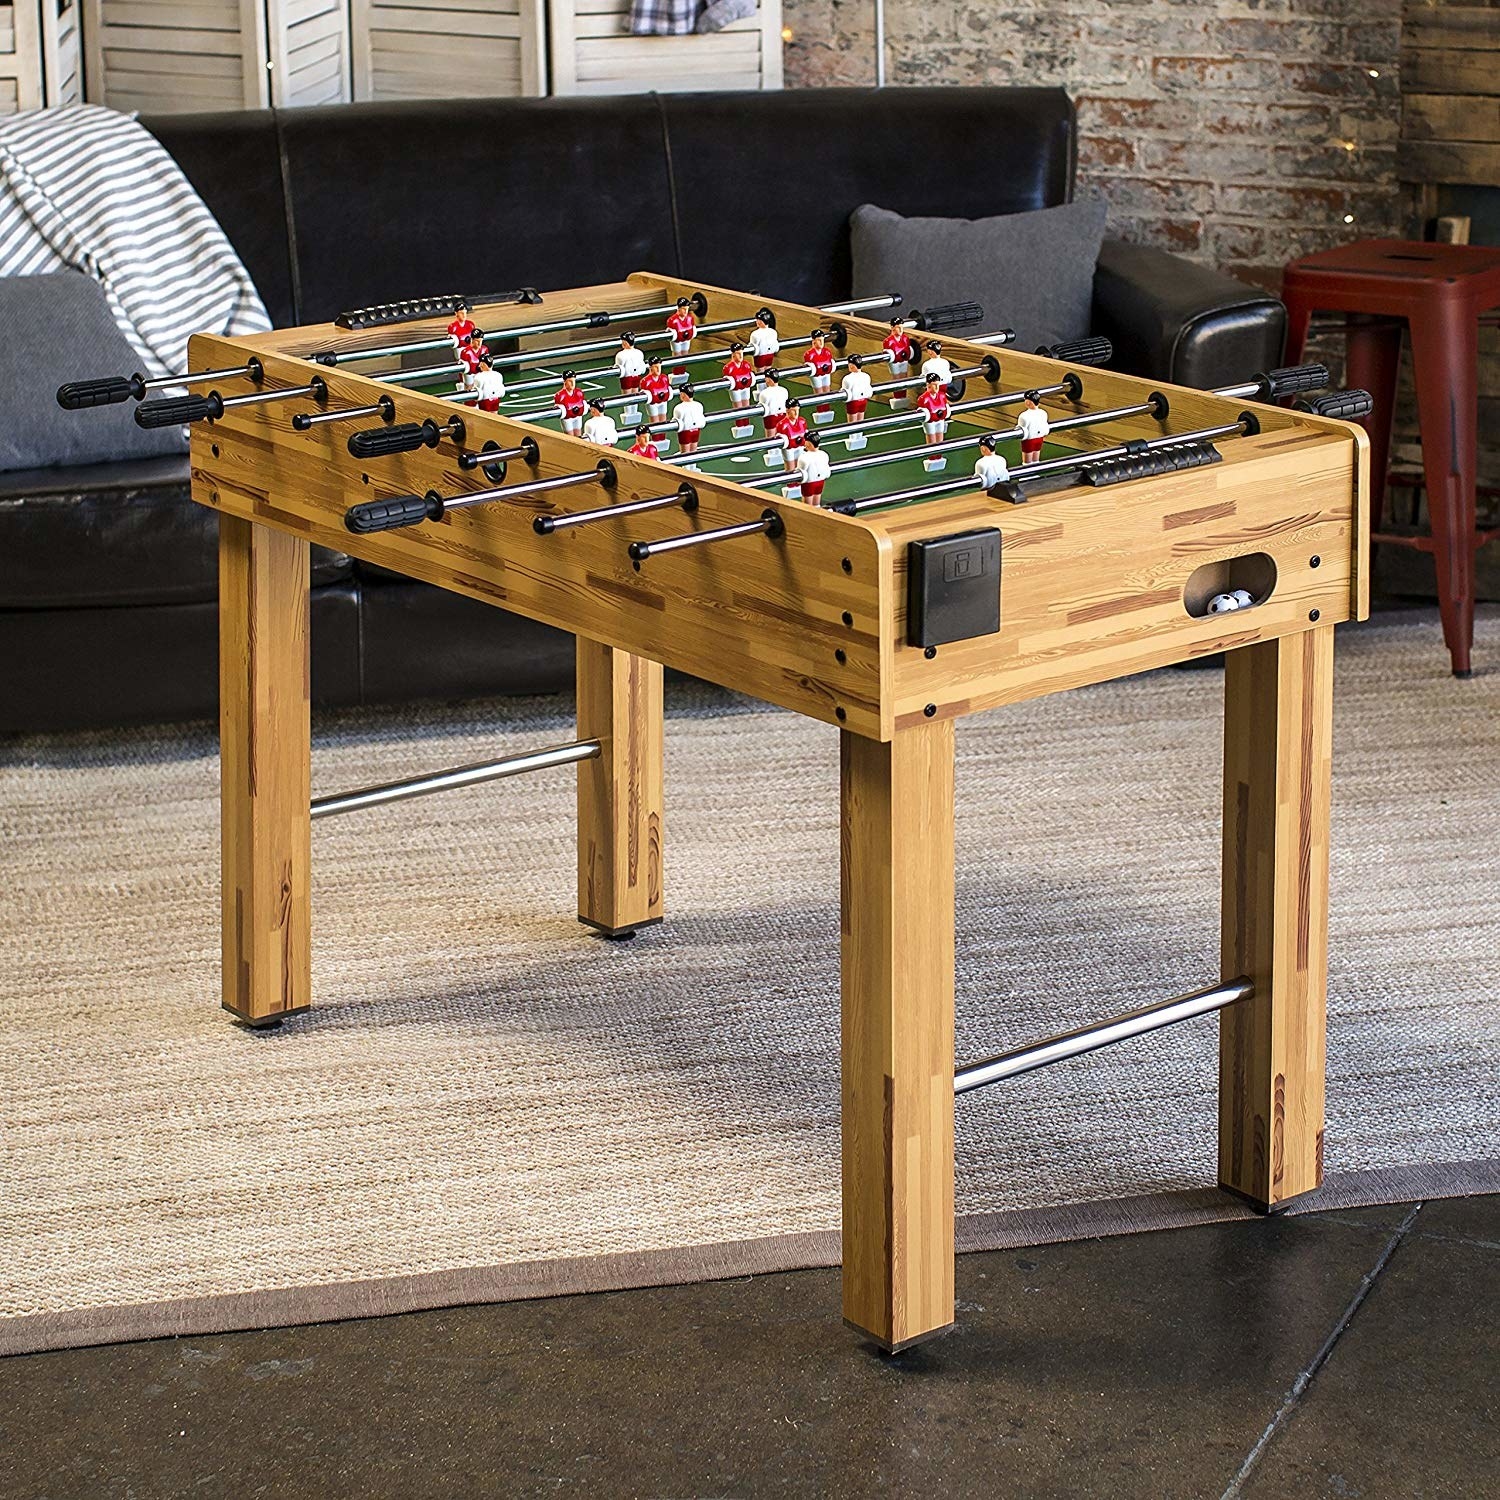 the foosball table  which has four legs and bars sticking into the top of the table that can be spun to control the soccer men on the bars inside of the table